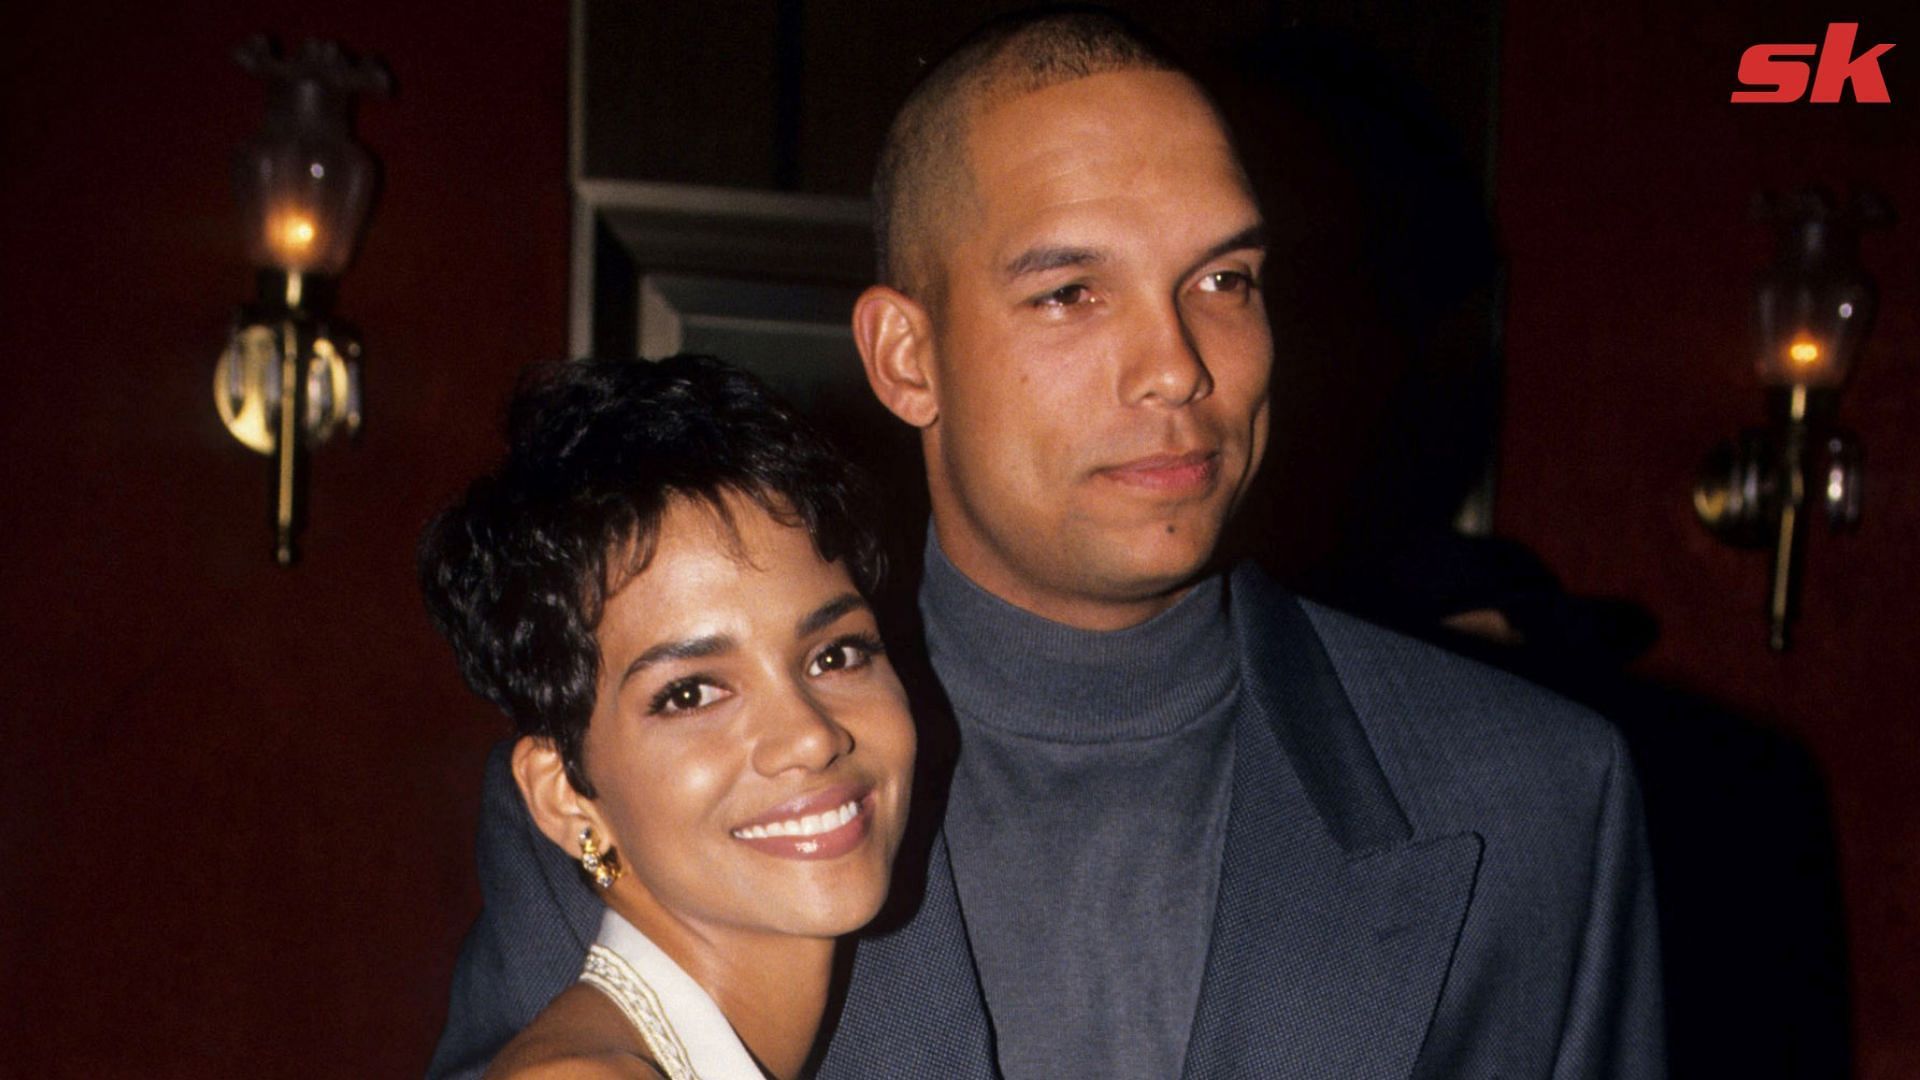 When former Atlanta Braves star David Justice held ex-wife Halle Berry  accountable for damaging his public persona